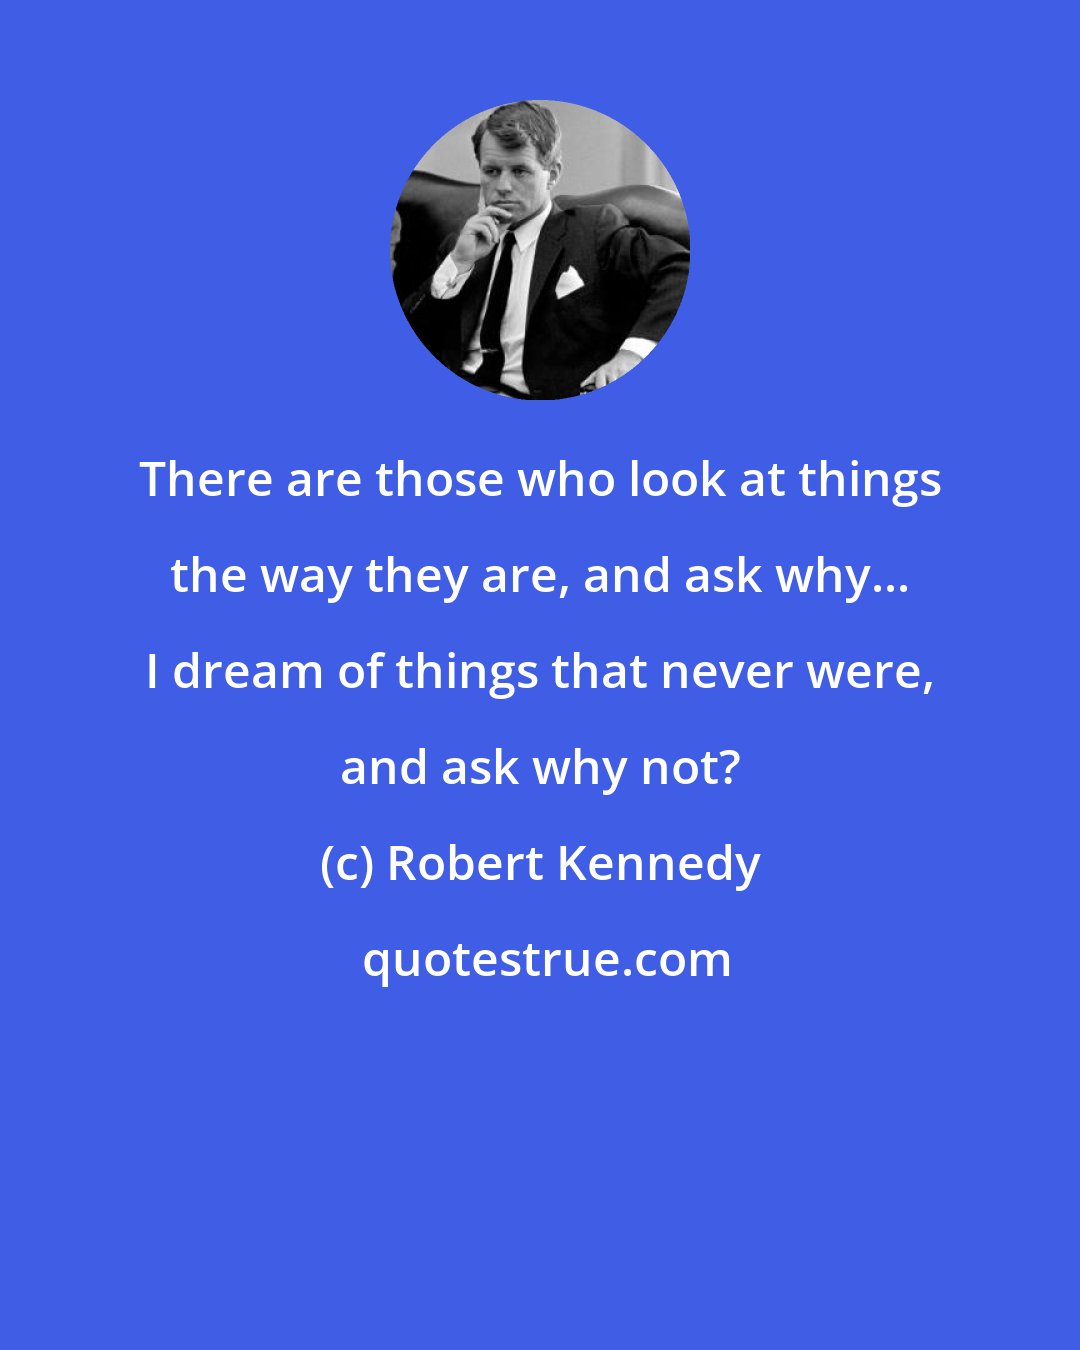 Robert Kennedy: There are those who look at things the way they are, and ask why... I dream of things that never were, and ask why not?